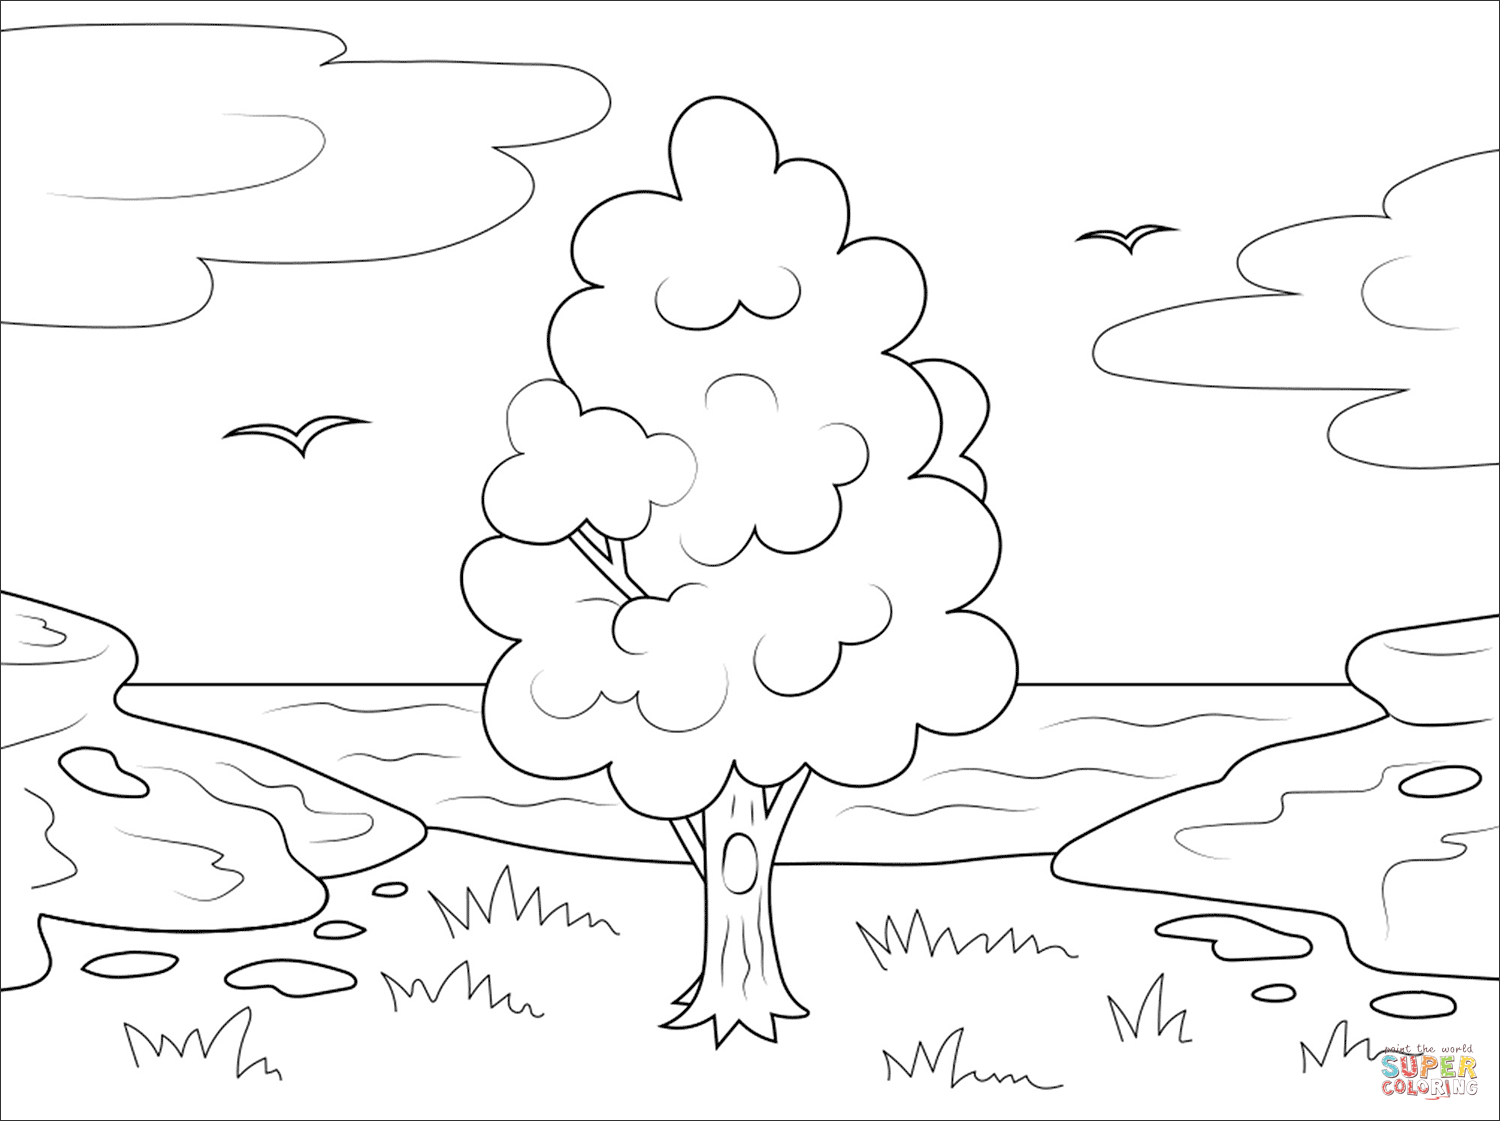 Tree and sea coloring page free printable coloring pages